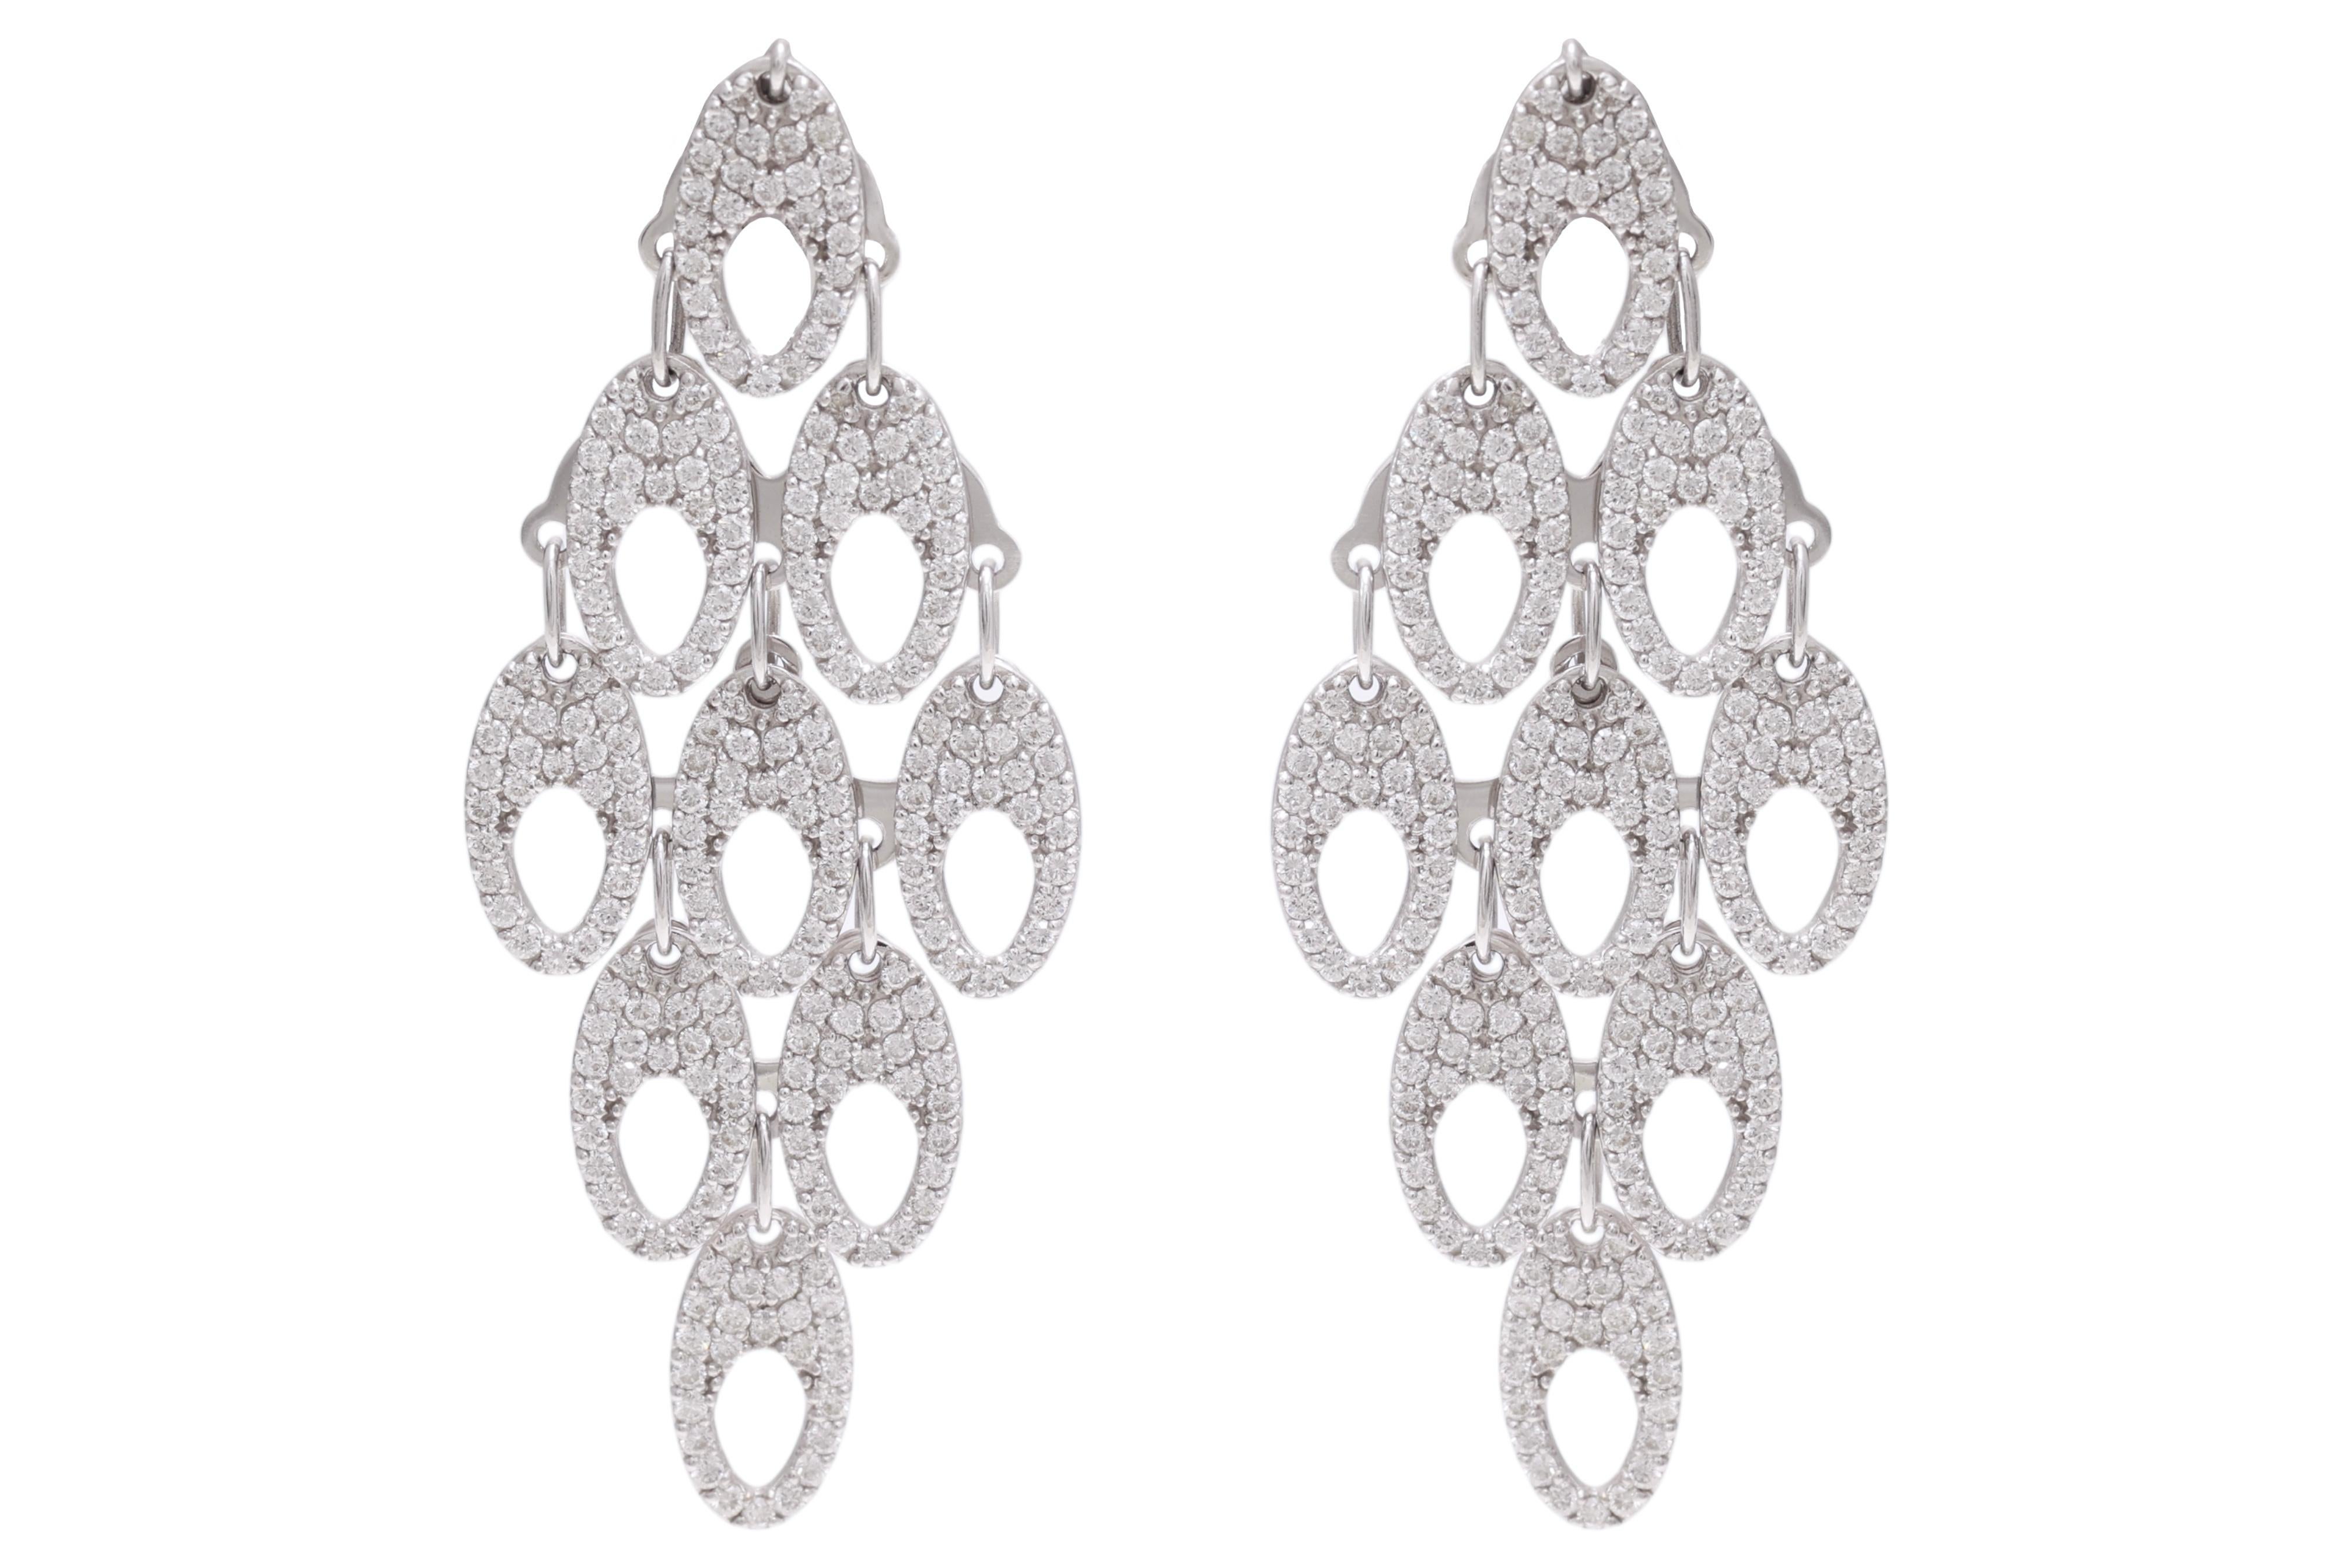 Magnificent Moving 18kt White Gold Chandelier Earrings With Diamonds